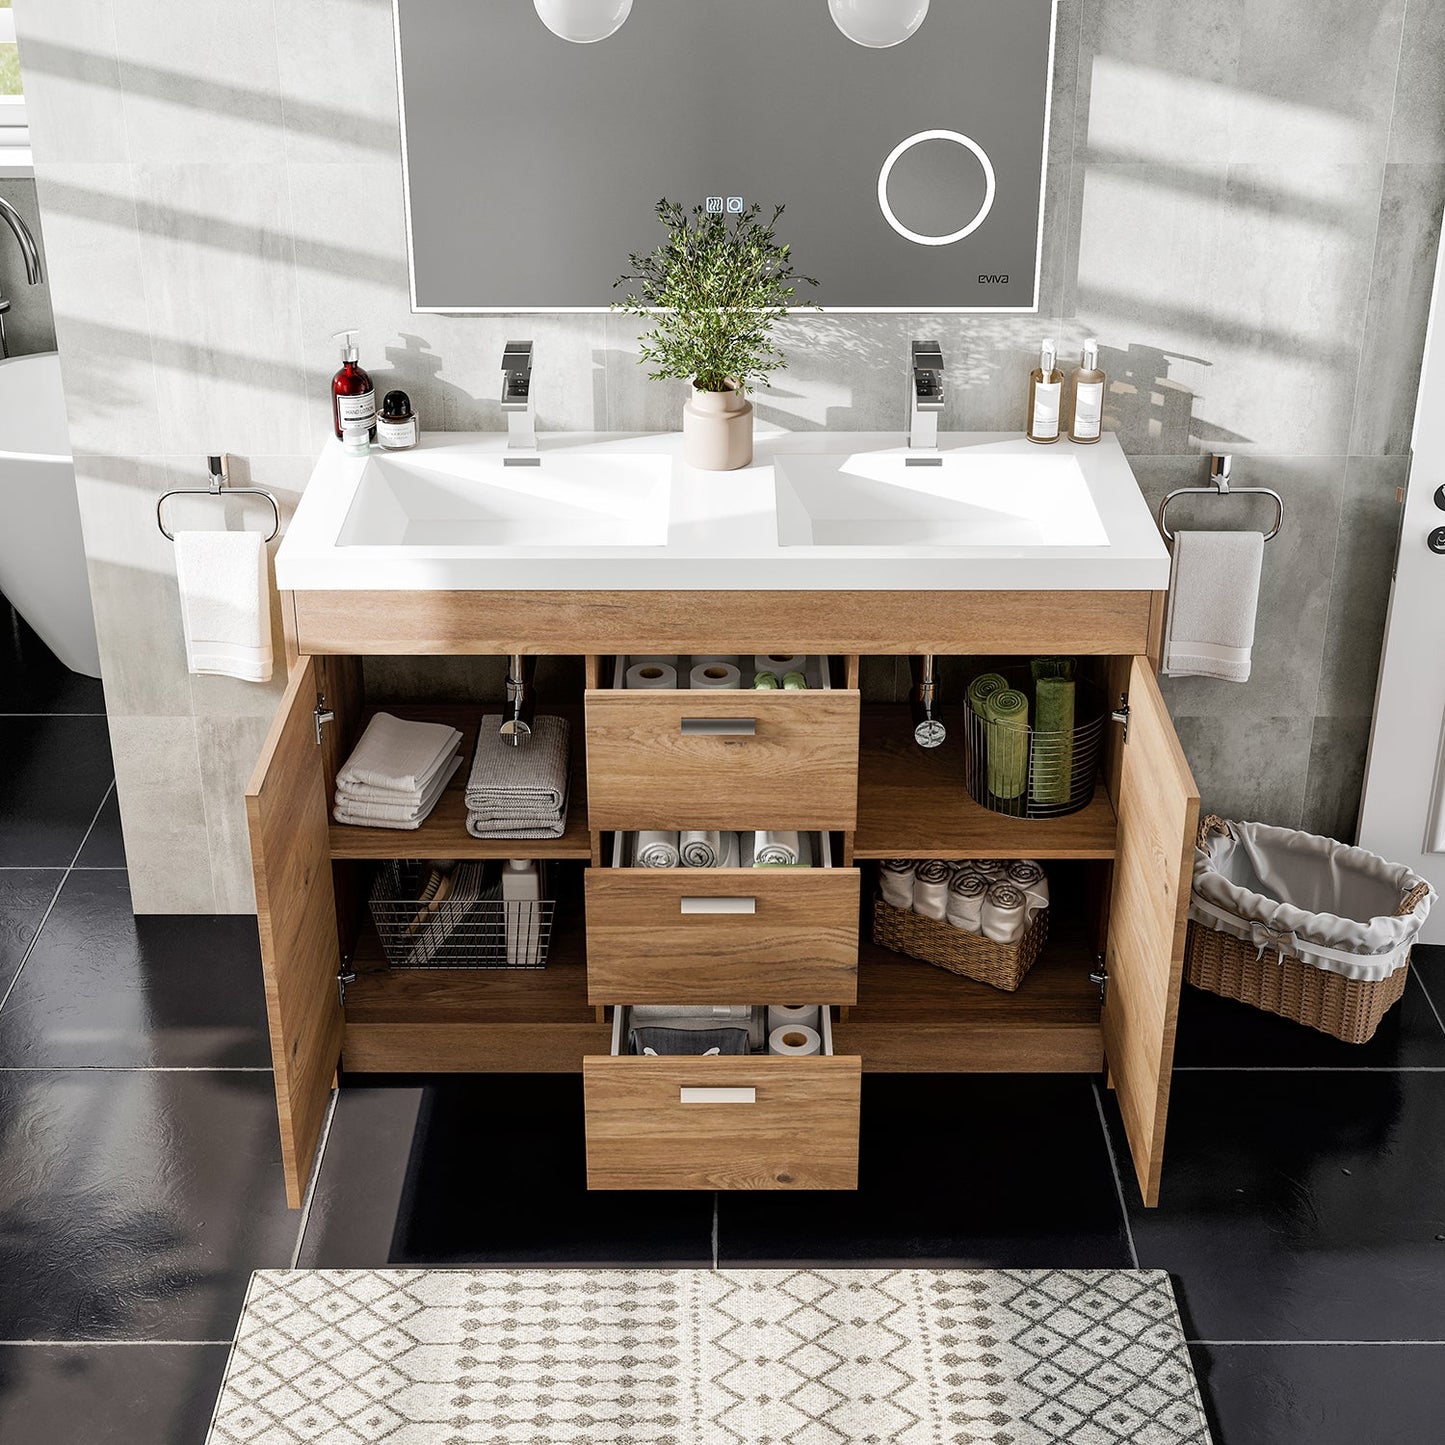 Lugano 48"W x 20" D Natural Oak Double Sink Bathroom Vanity with Acrylic Countertop and Integrated Sink